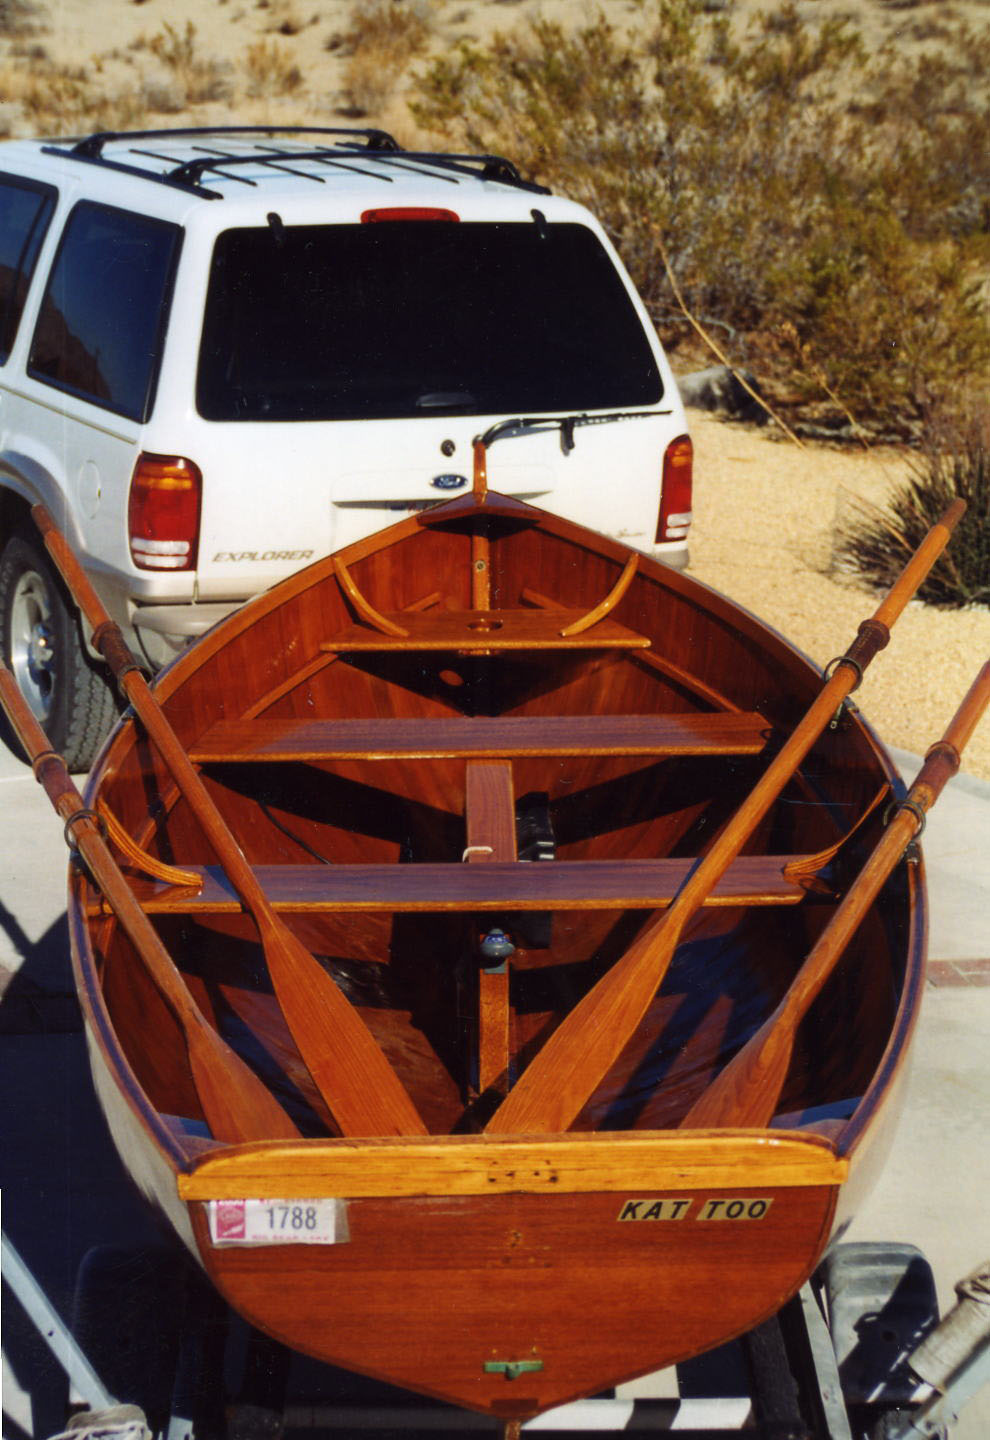 Kutter's Catspaw Sailing Dinghy